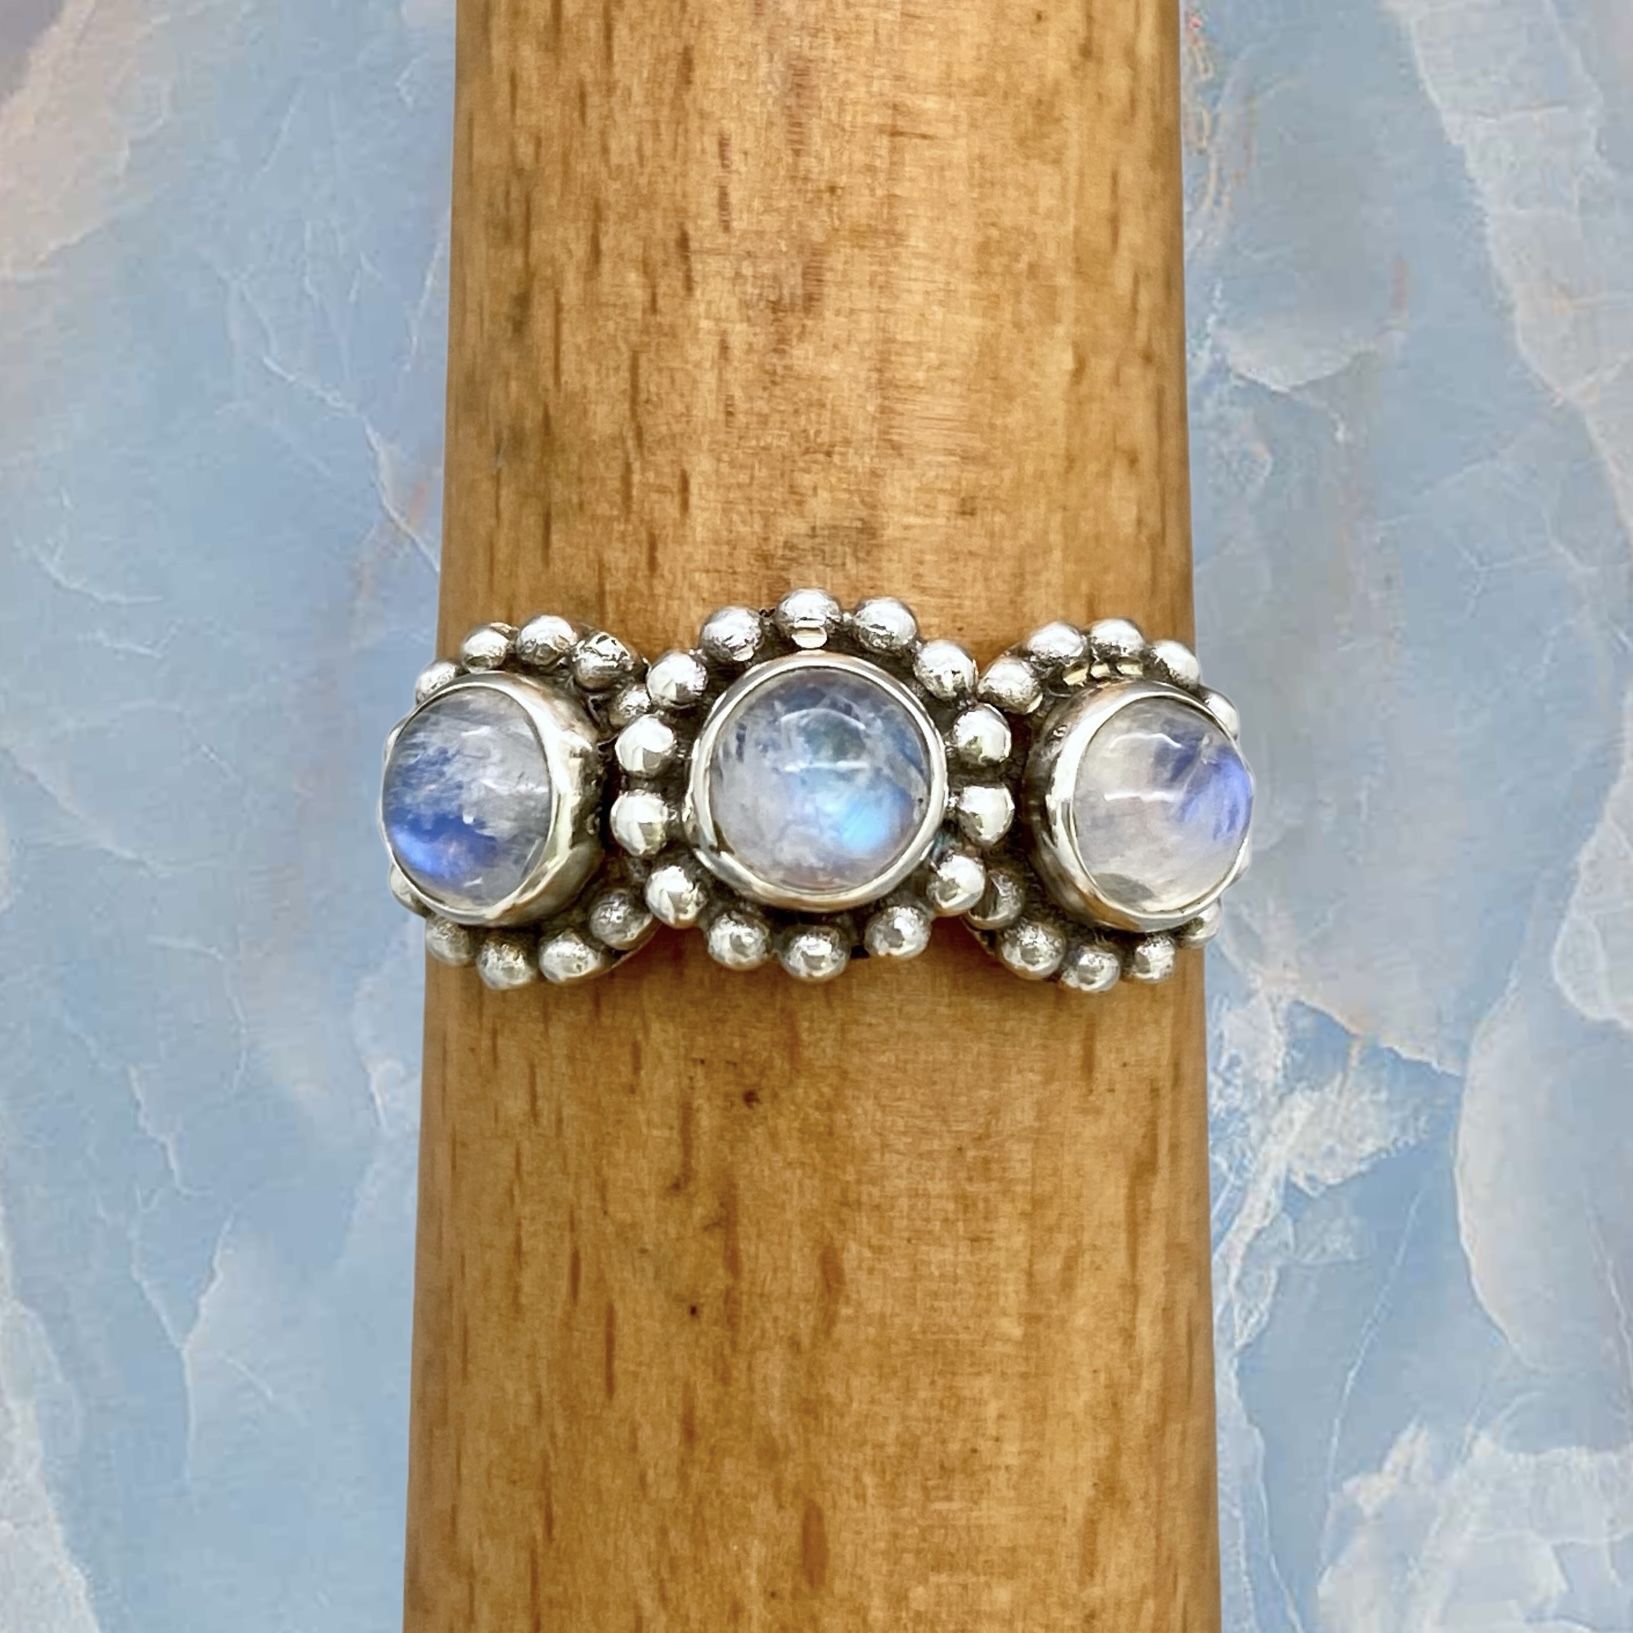 Handcrafted Genuine Rainbow Moonstone & Solid Sterling Silver Ring - Sz 10